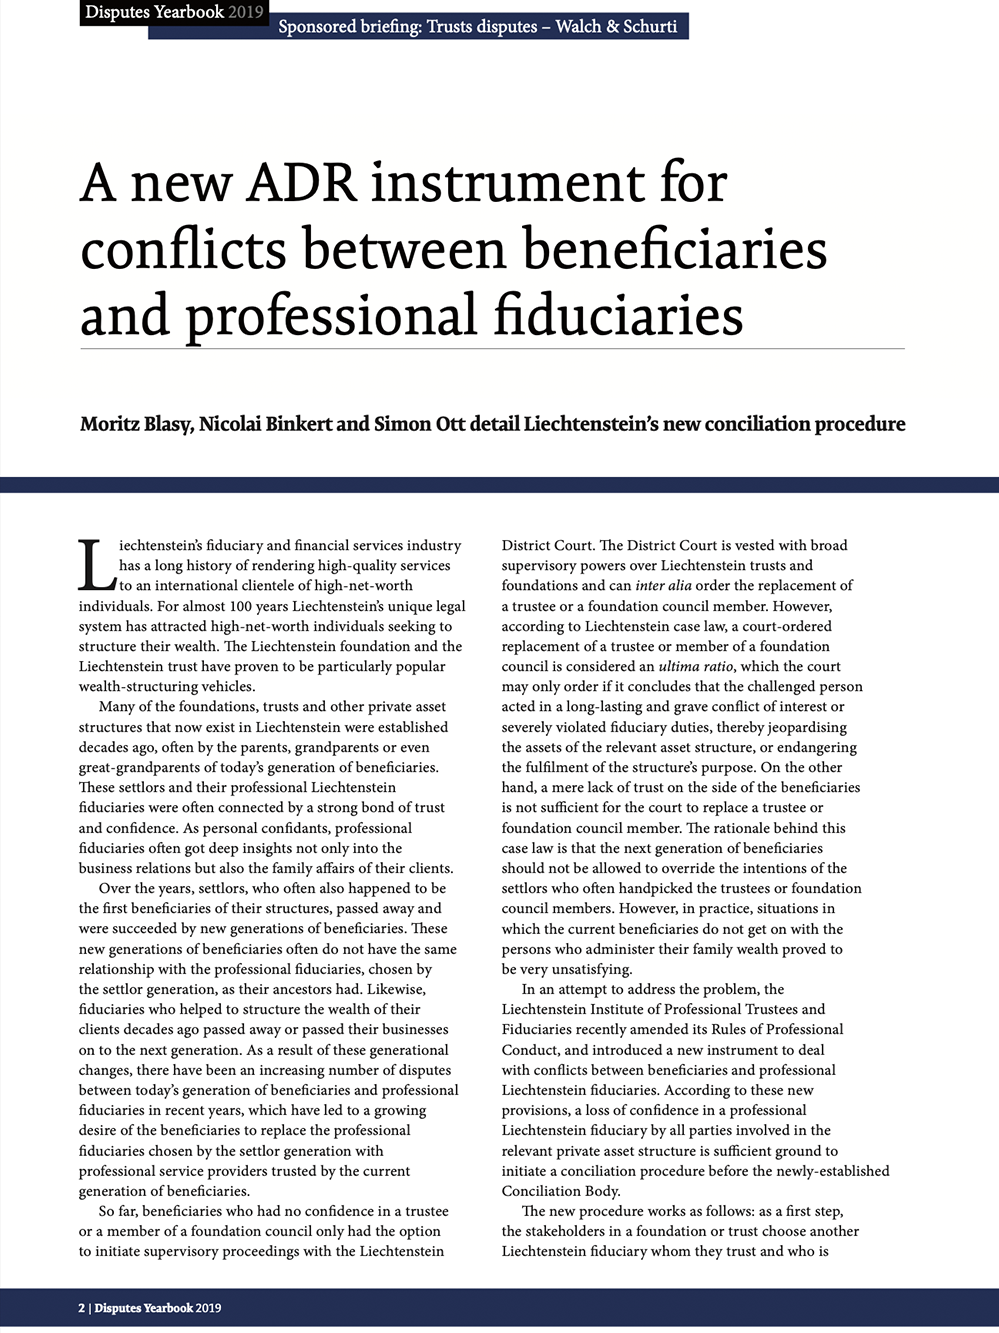 Disputes Yearbook 19 | A new ADR instrument for conflicts between beneficiaries and professional fiduciaries